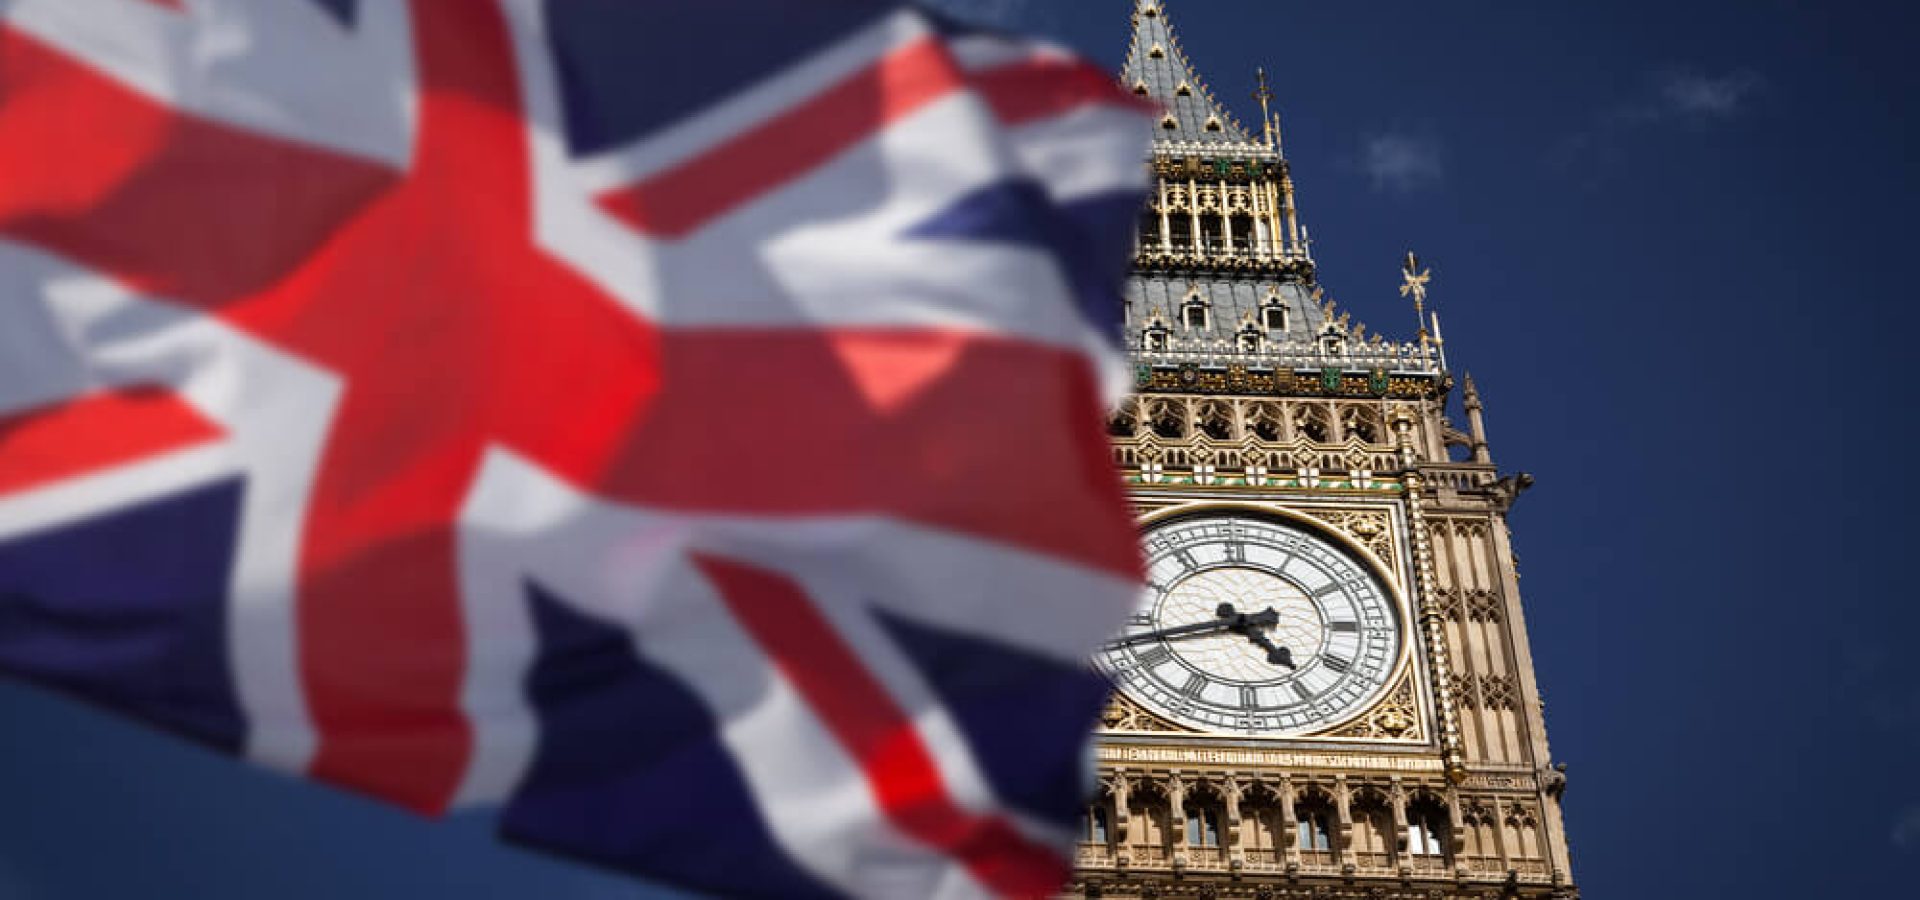 Wibest – British Prime Minister: The Union Jack and the Big Ben